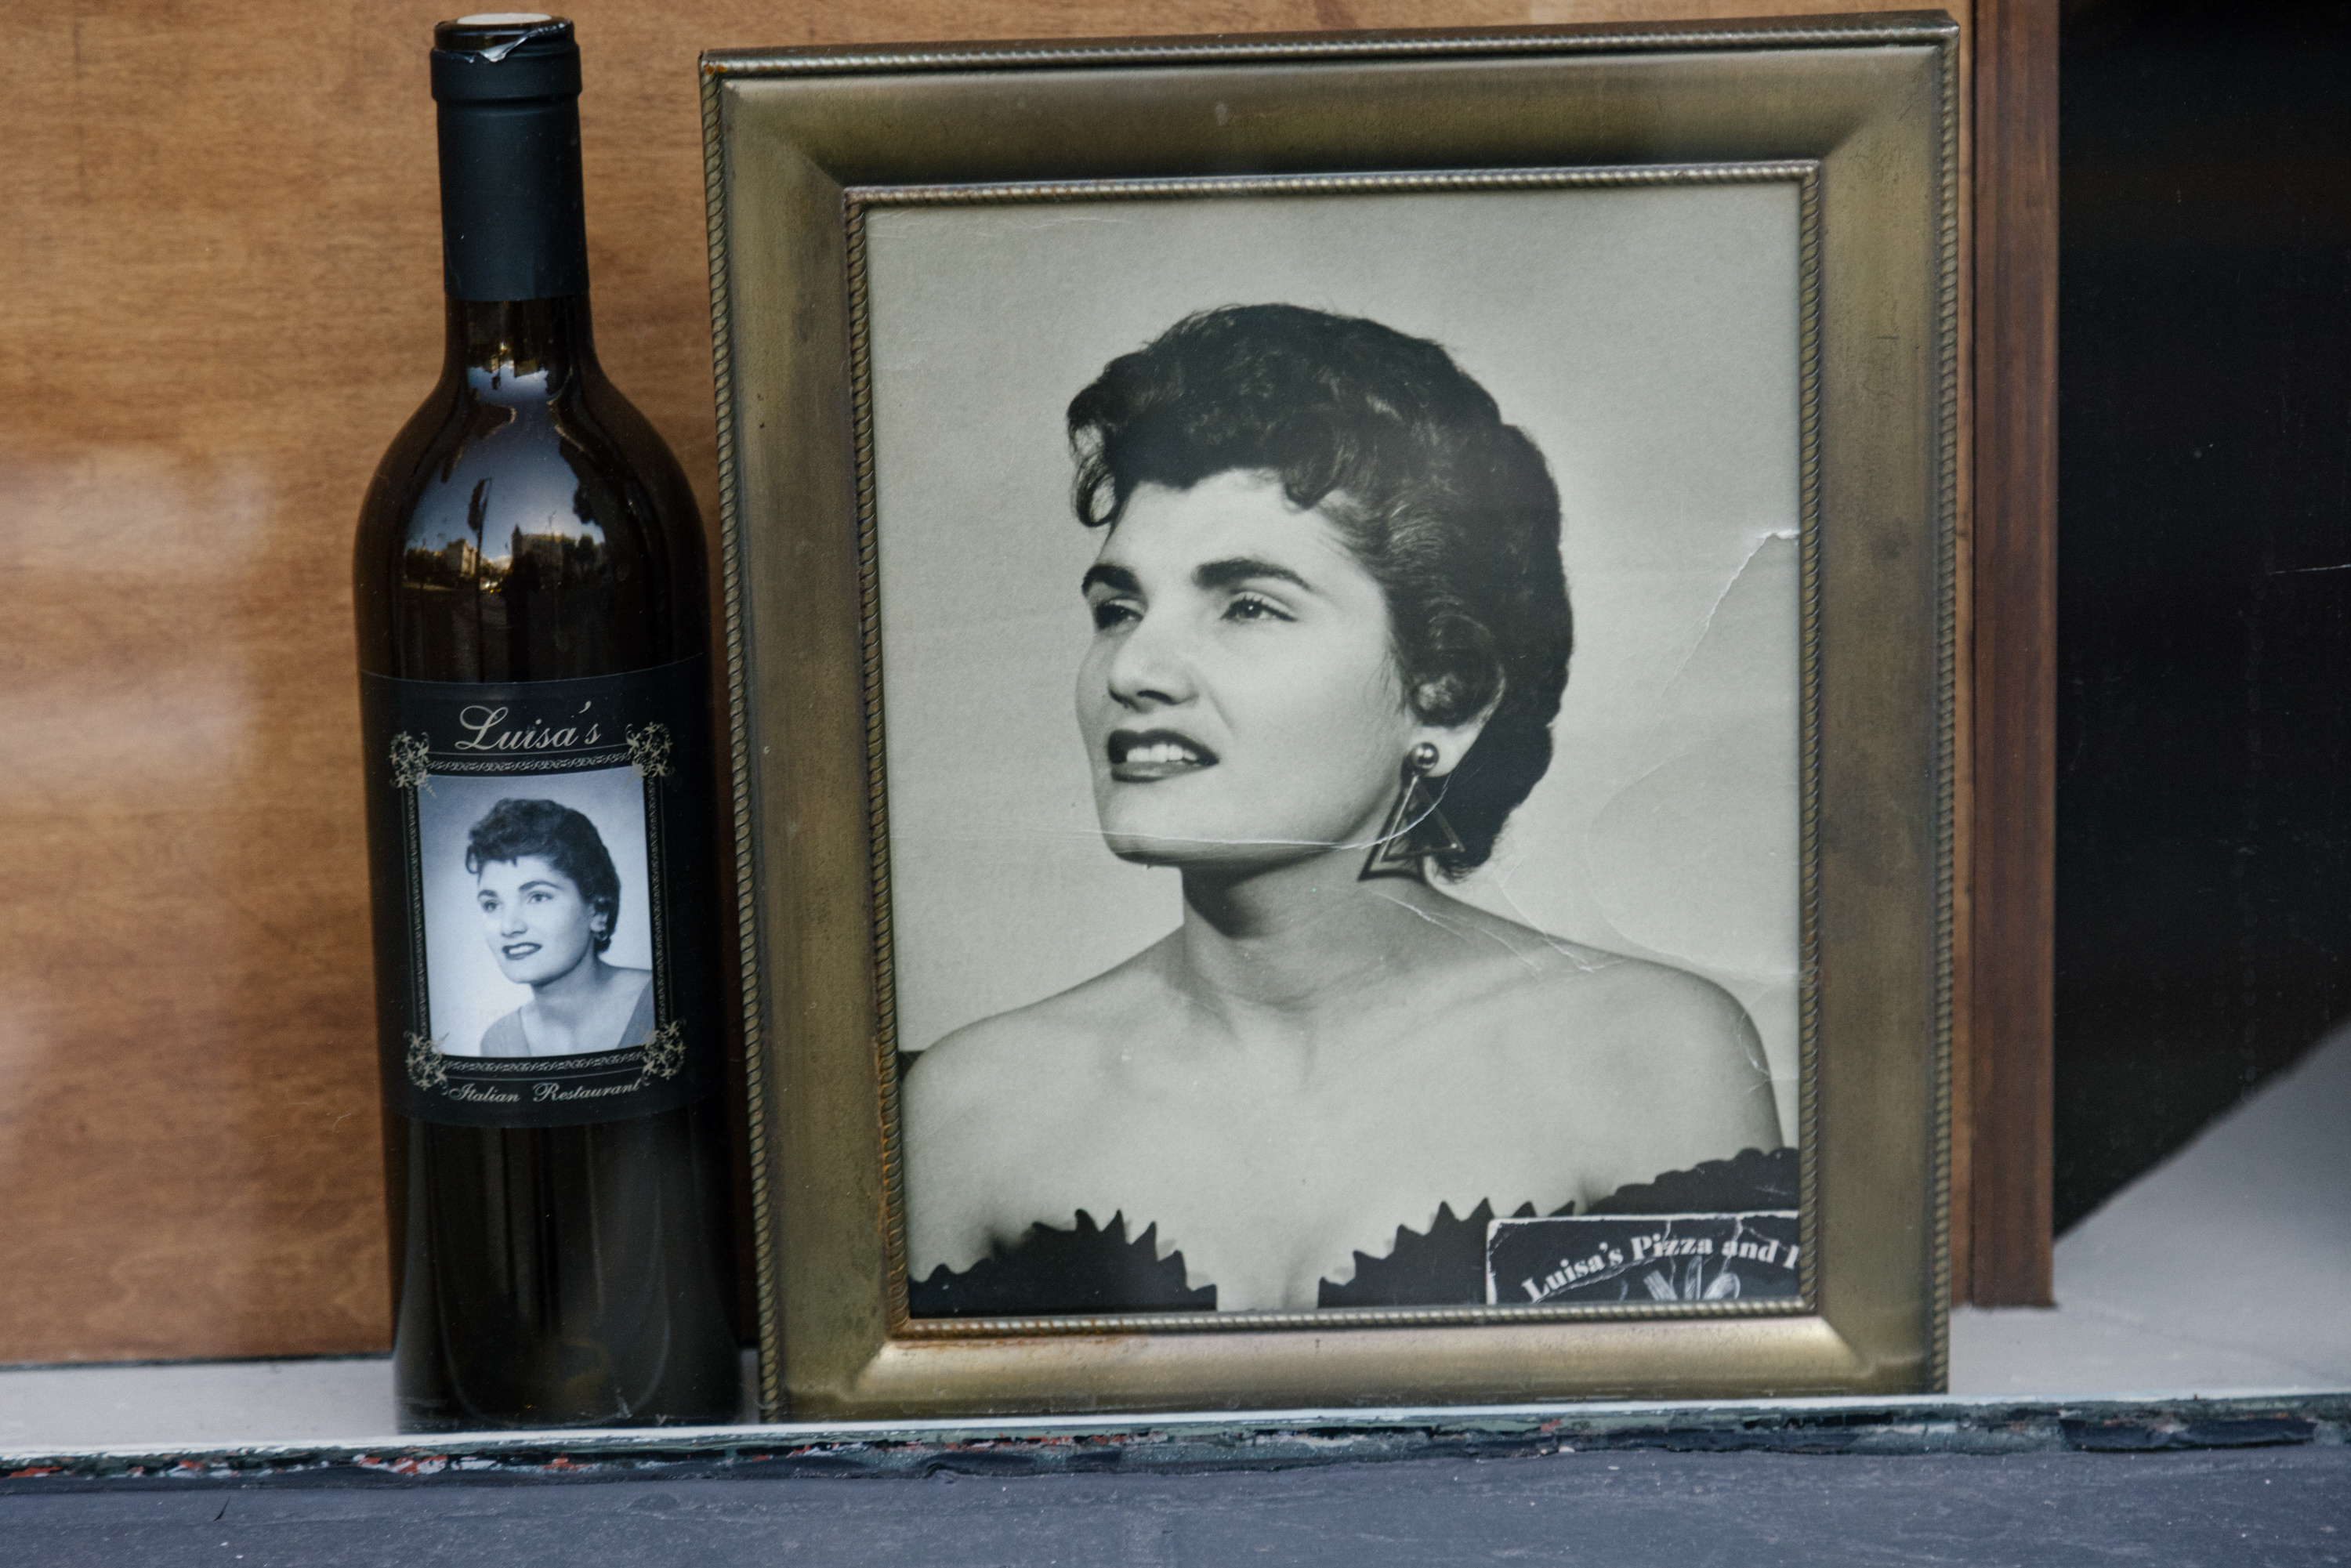 A framed black-and-white portrait of a smiling woman next to a wine bottle with a similar image label.